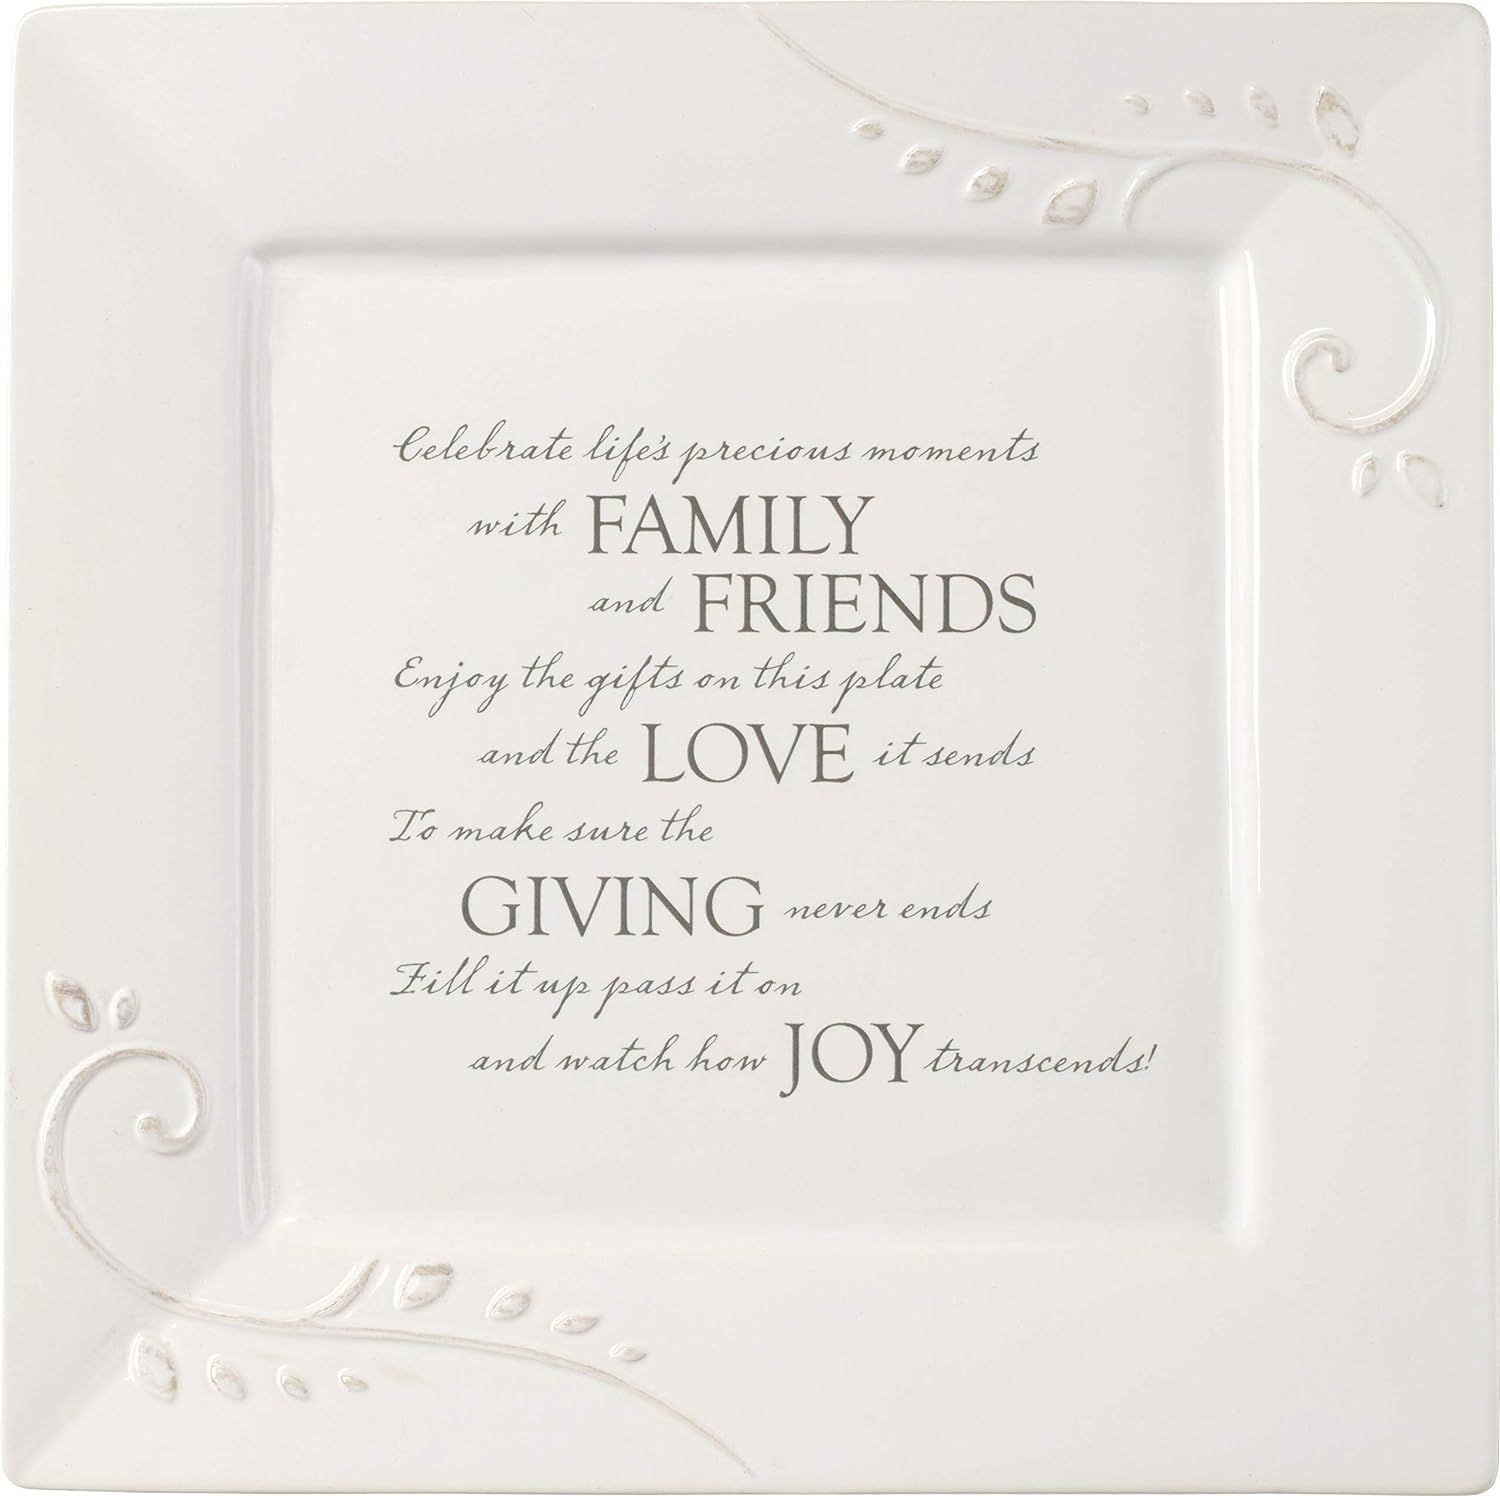 Precious Moments Giving Plate Ceramic Serving Platter, 10in x 10in, White | Amazon (US)